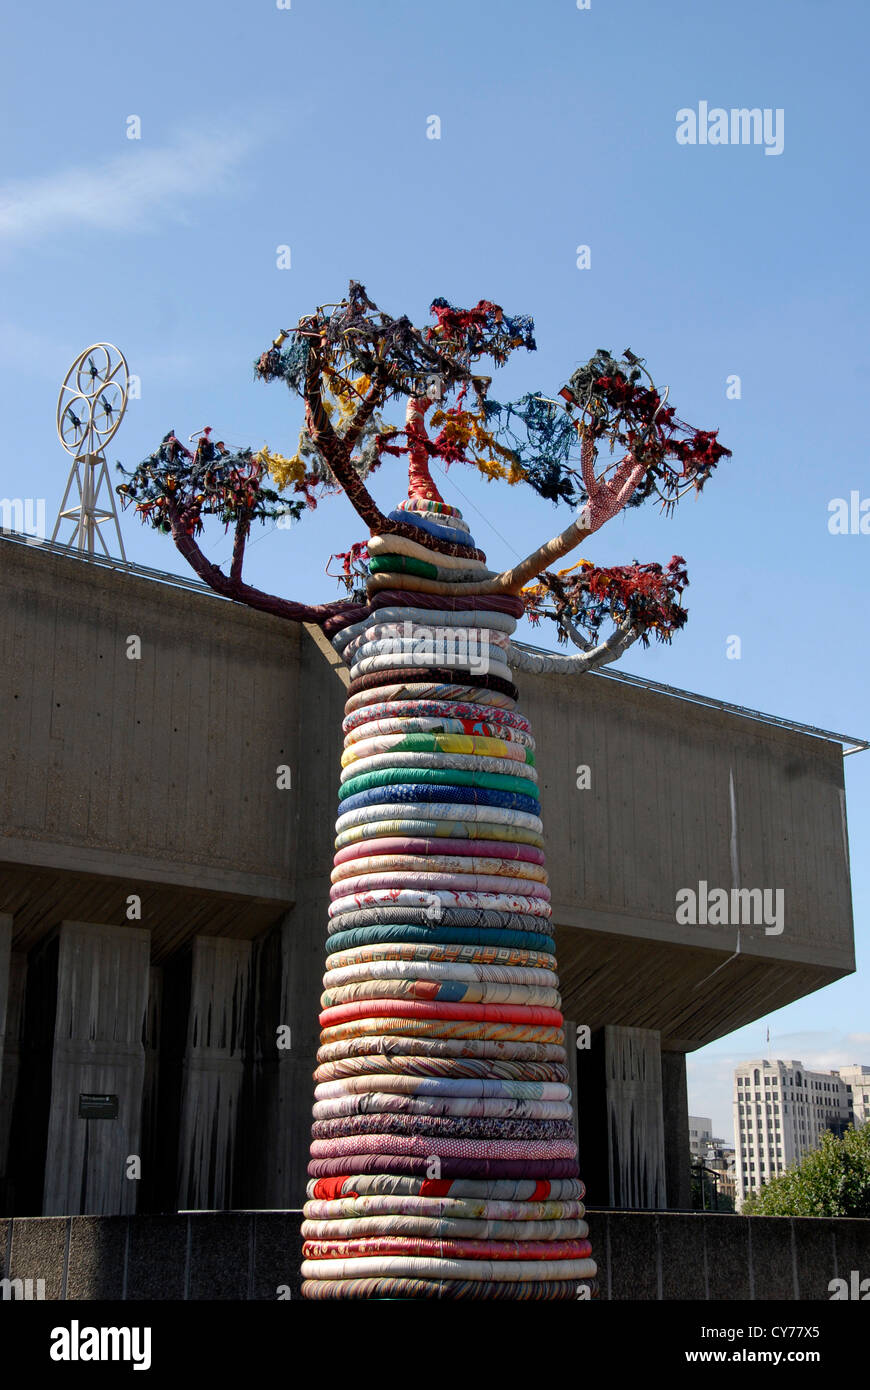 The Pirate Technics Sculpture Under The Baobab installed on the Southbank  as part of the Festival of the World festivaLondon UK Stock Photo